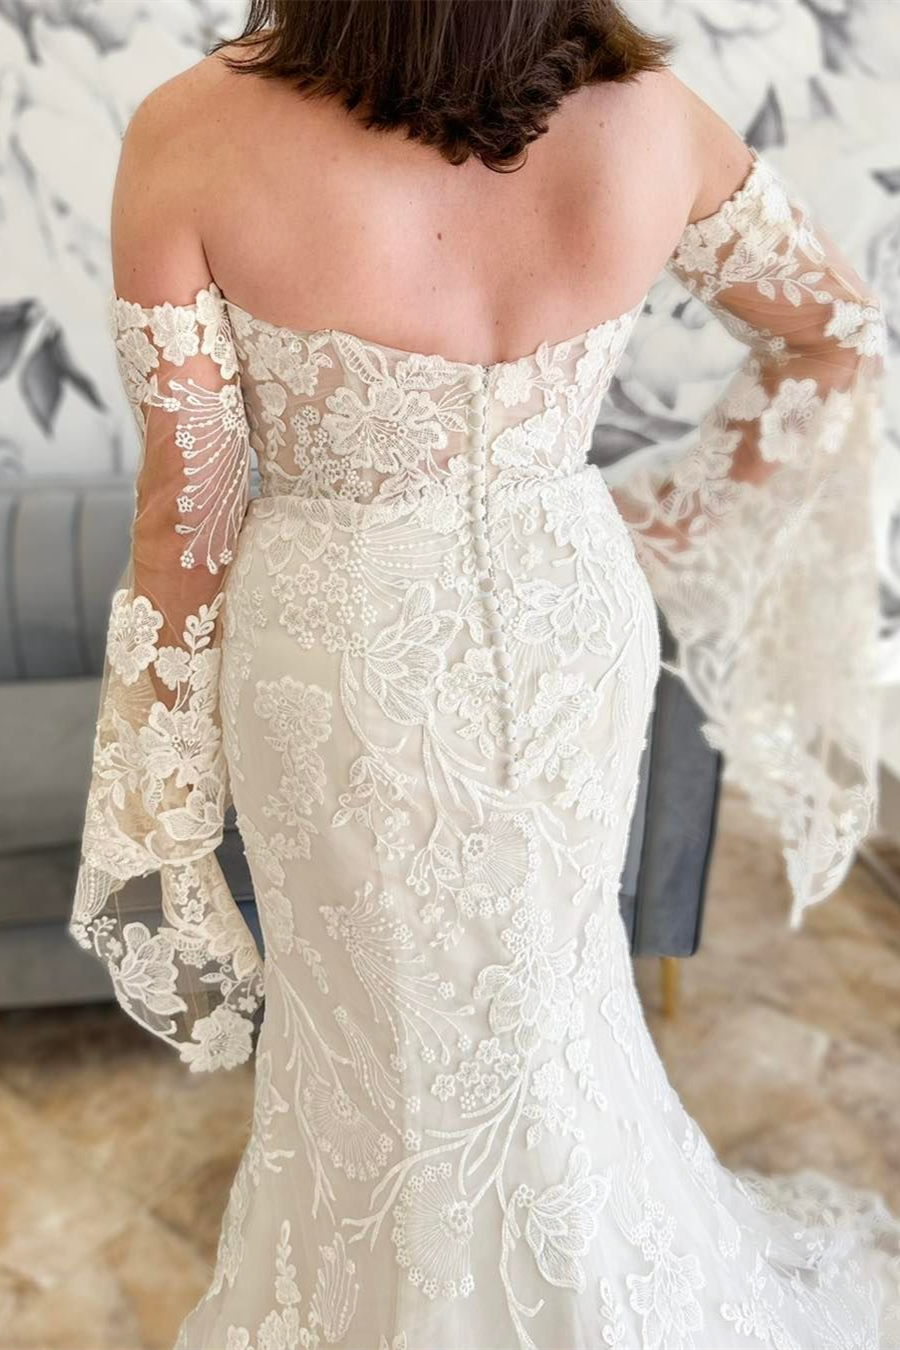 White Strapless Mermaid Lace Long Wedding Dress with Detachable Sleeves